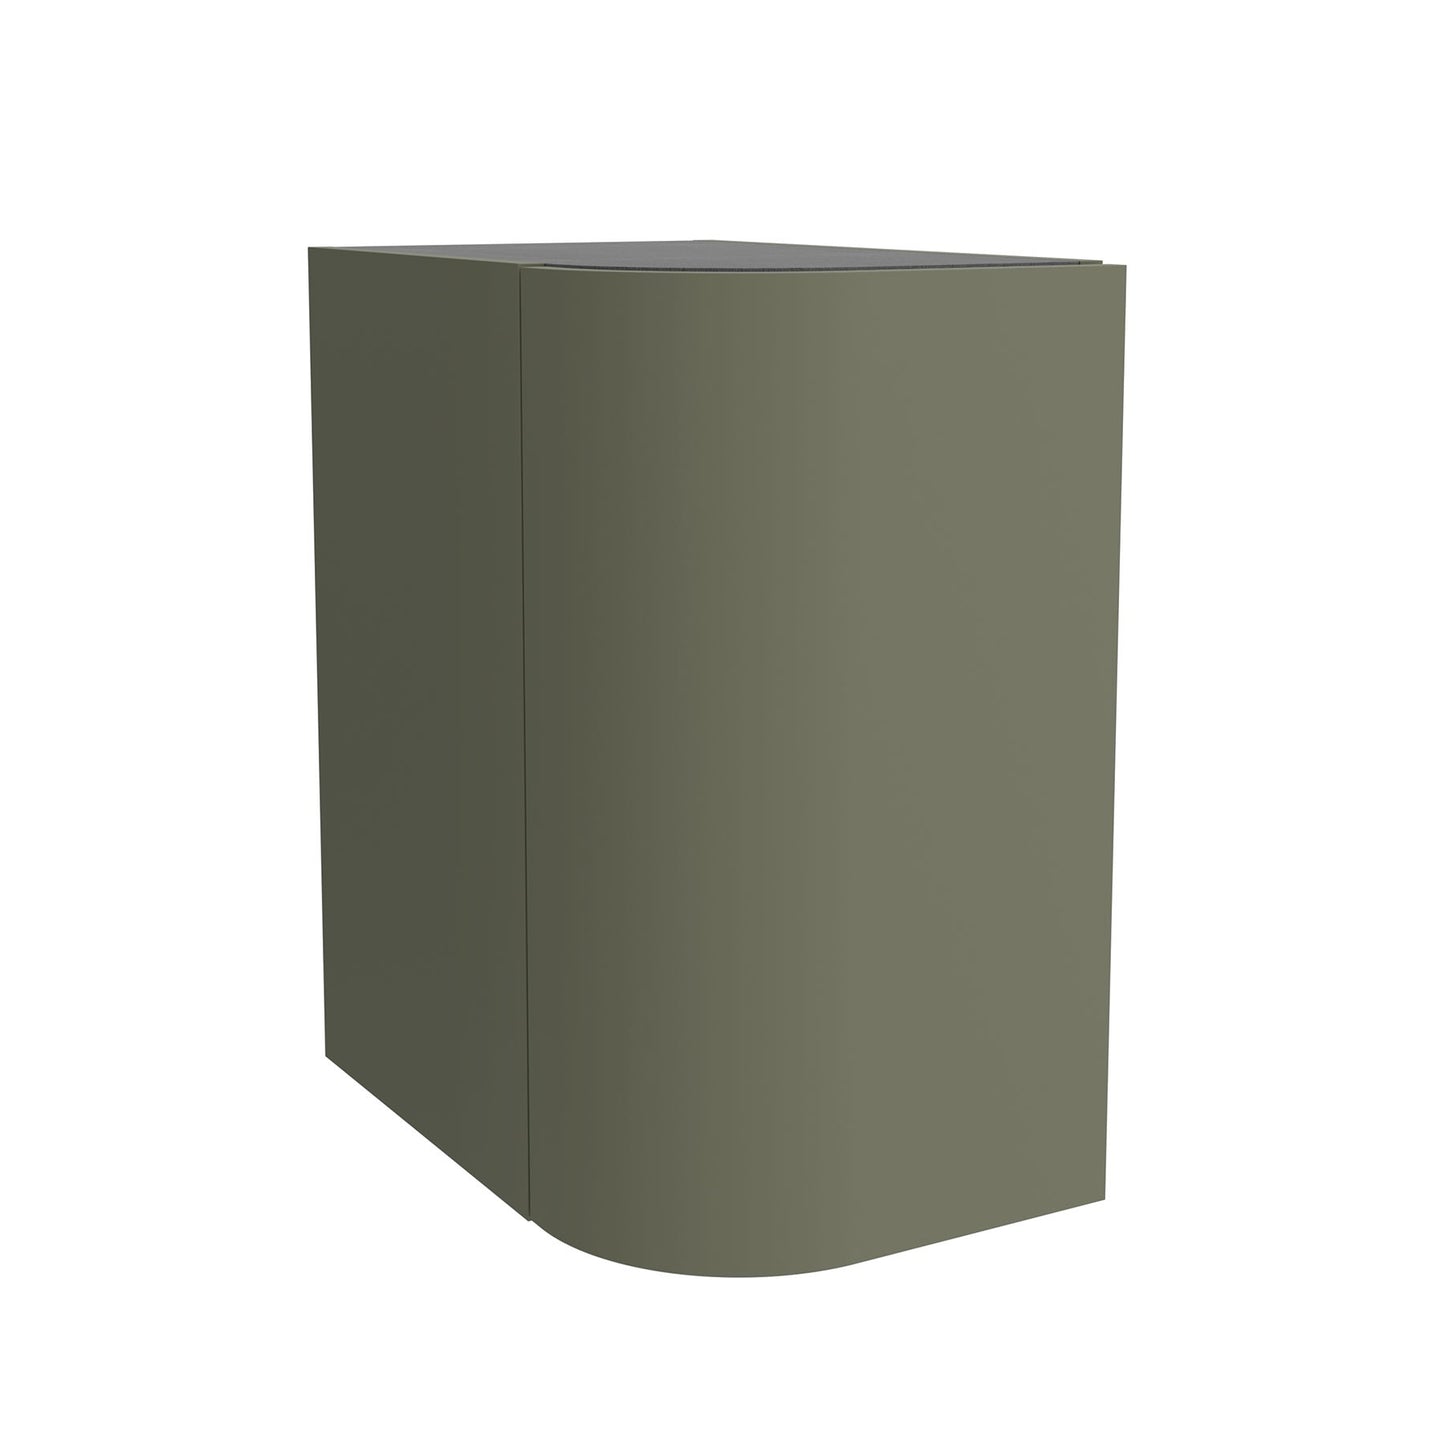 Wall hung storage unit with round corner 12 inches (300) Alliance Green Forest one door reversible *SPECIAL ORDER*